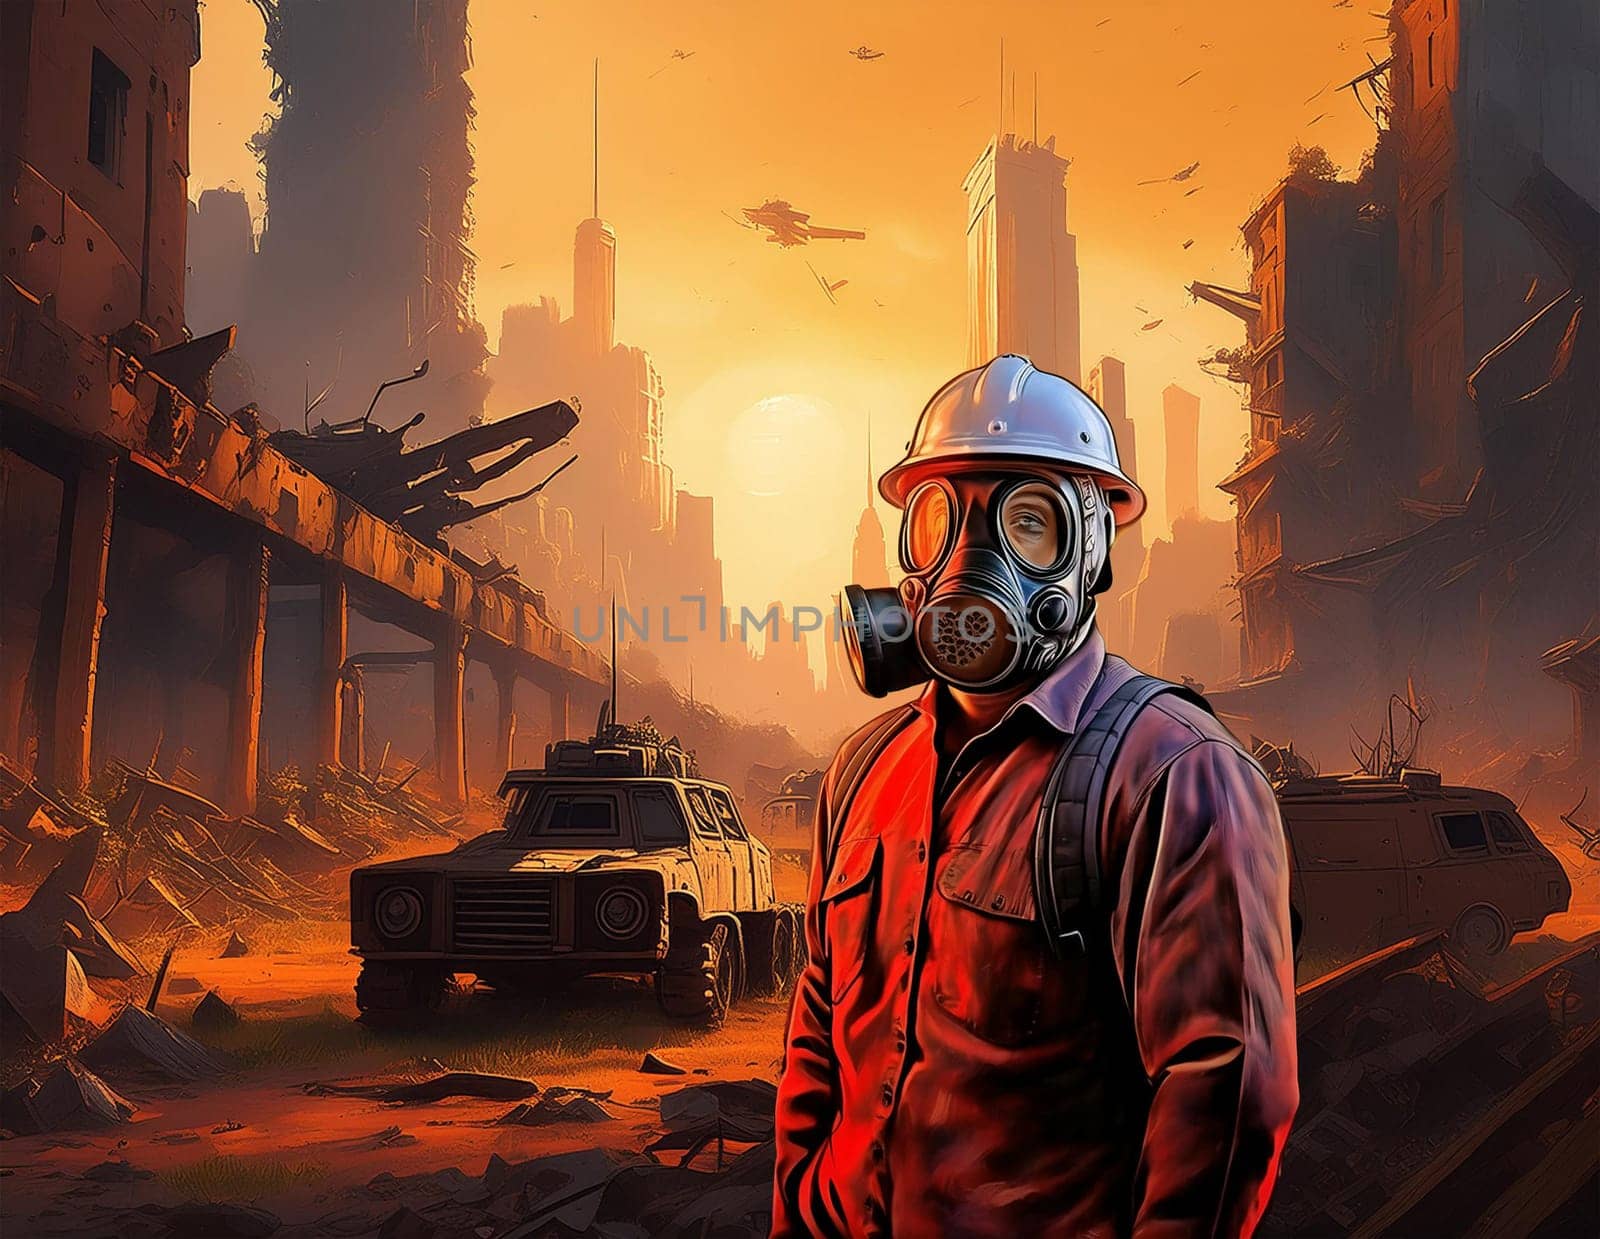 Post-apocalyptic ruined city, destroyed buildings, burned-out vehicles, destroyed streets